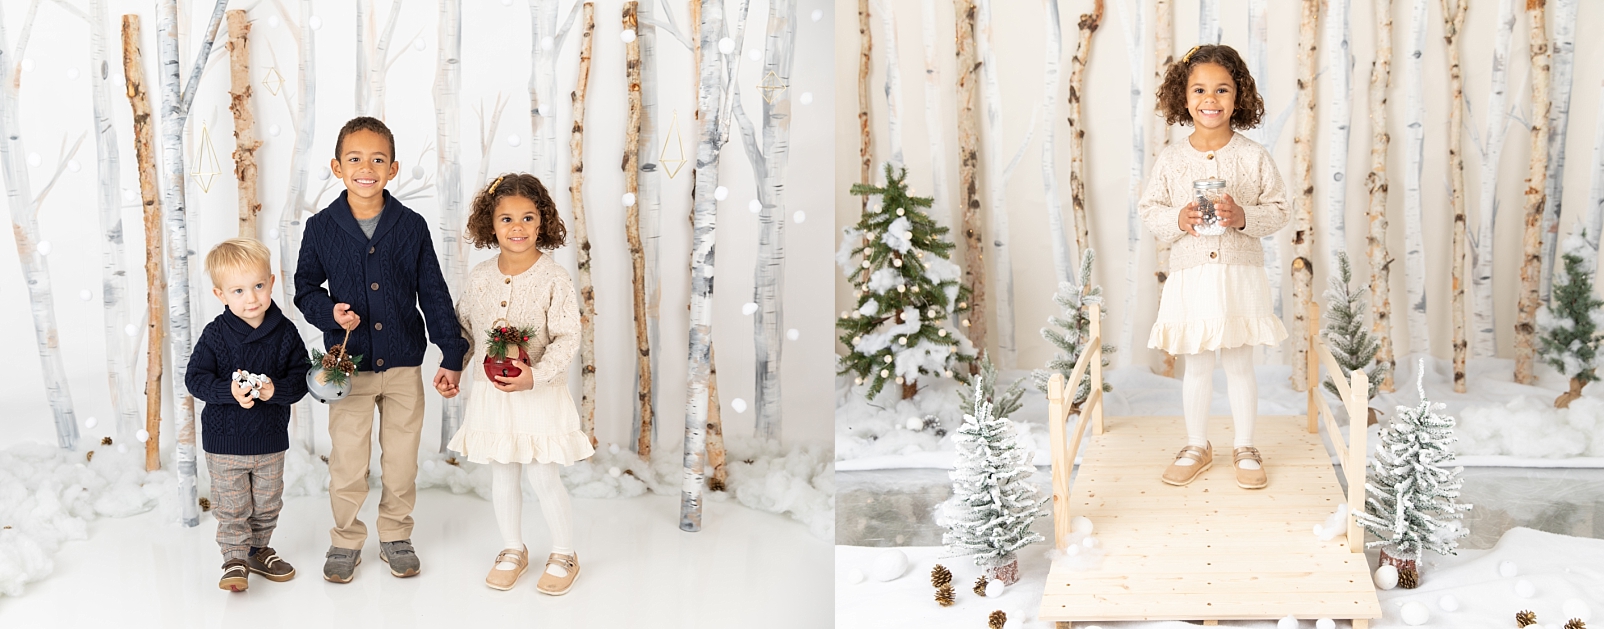 3 children standing in front of birch trees with jingle bells and girl standing on bridge with jar for Christmas Minis in  Maryland
